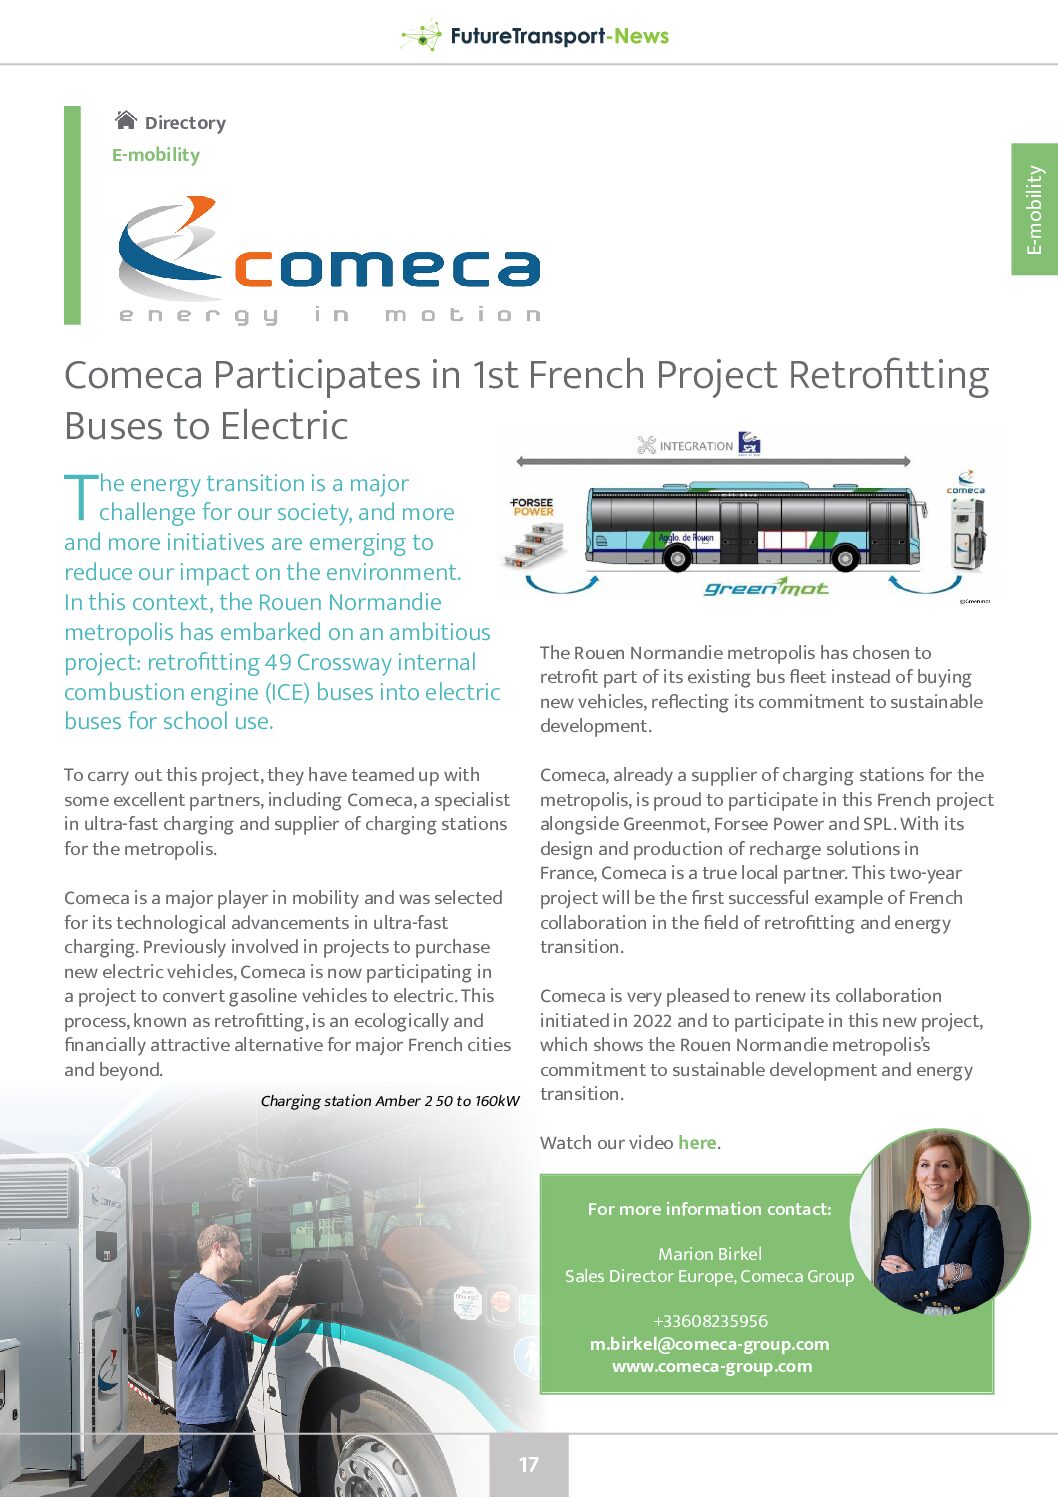 Comeca Participates in 1st French Project Retrofitting Buses to Electric